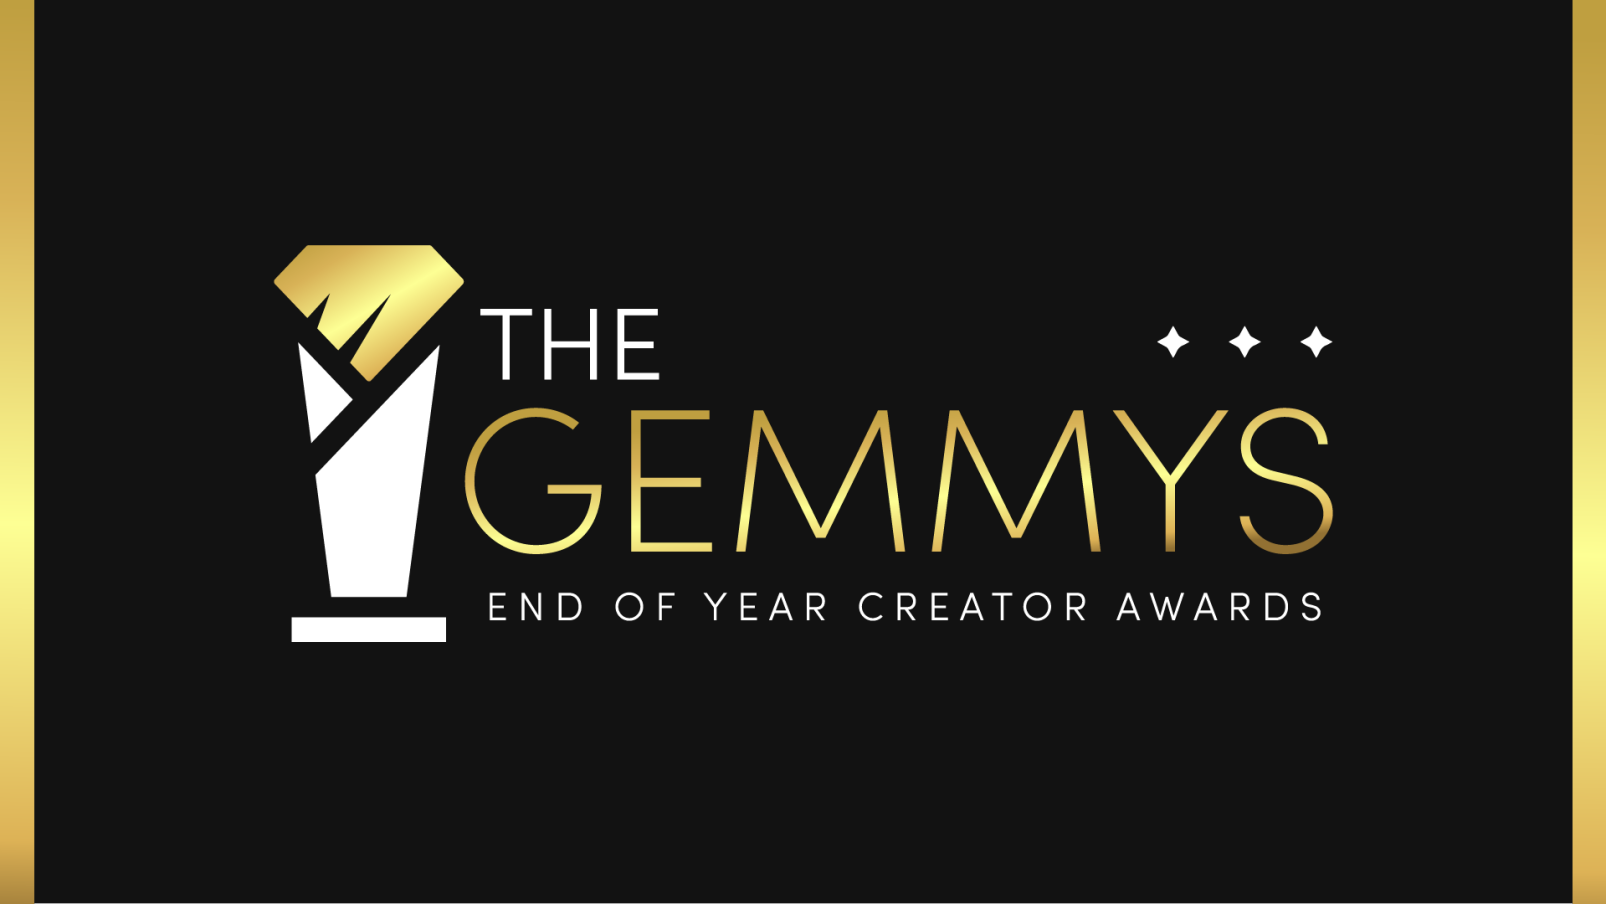 Introducing the Gemmys End of Year Creator Awards